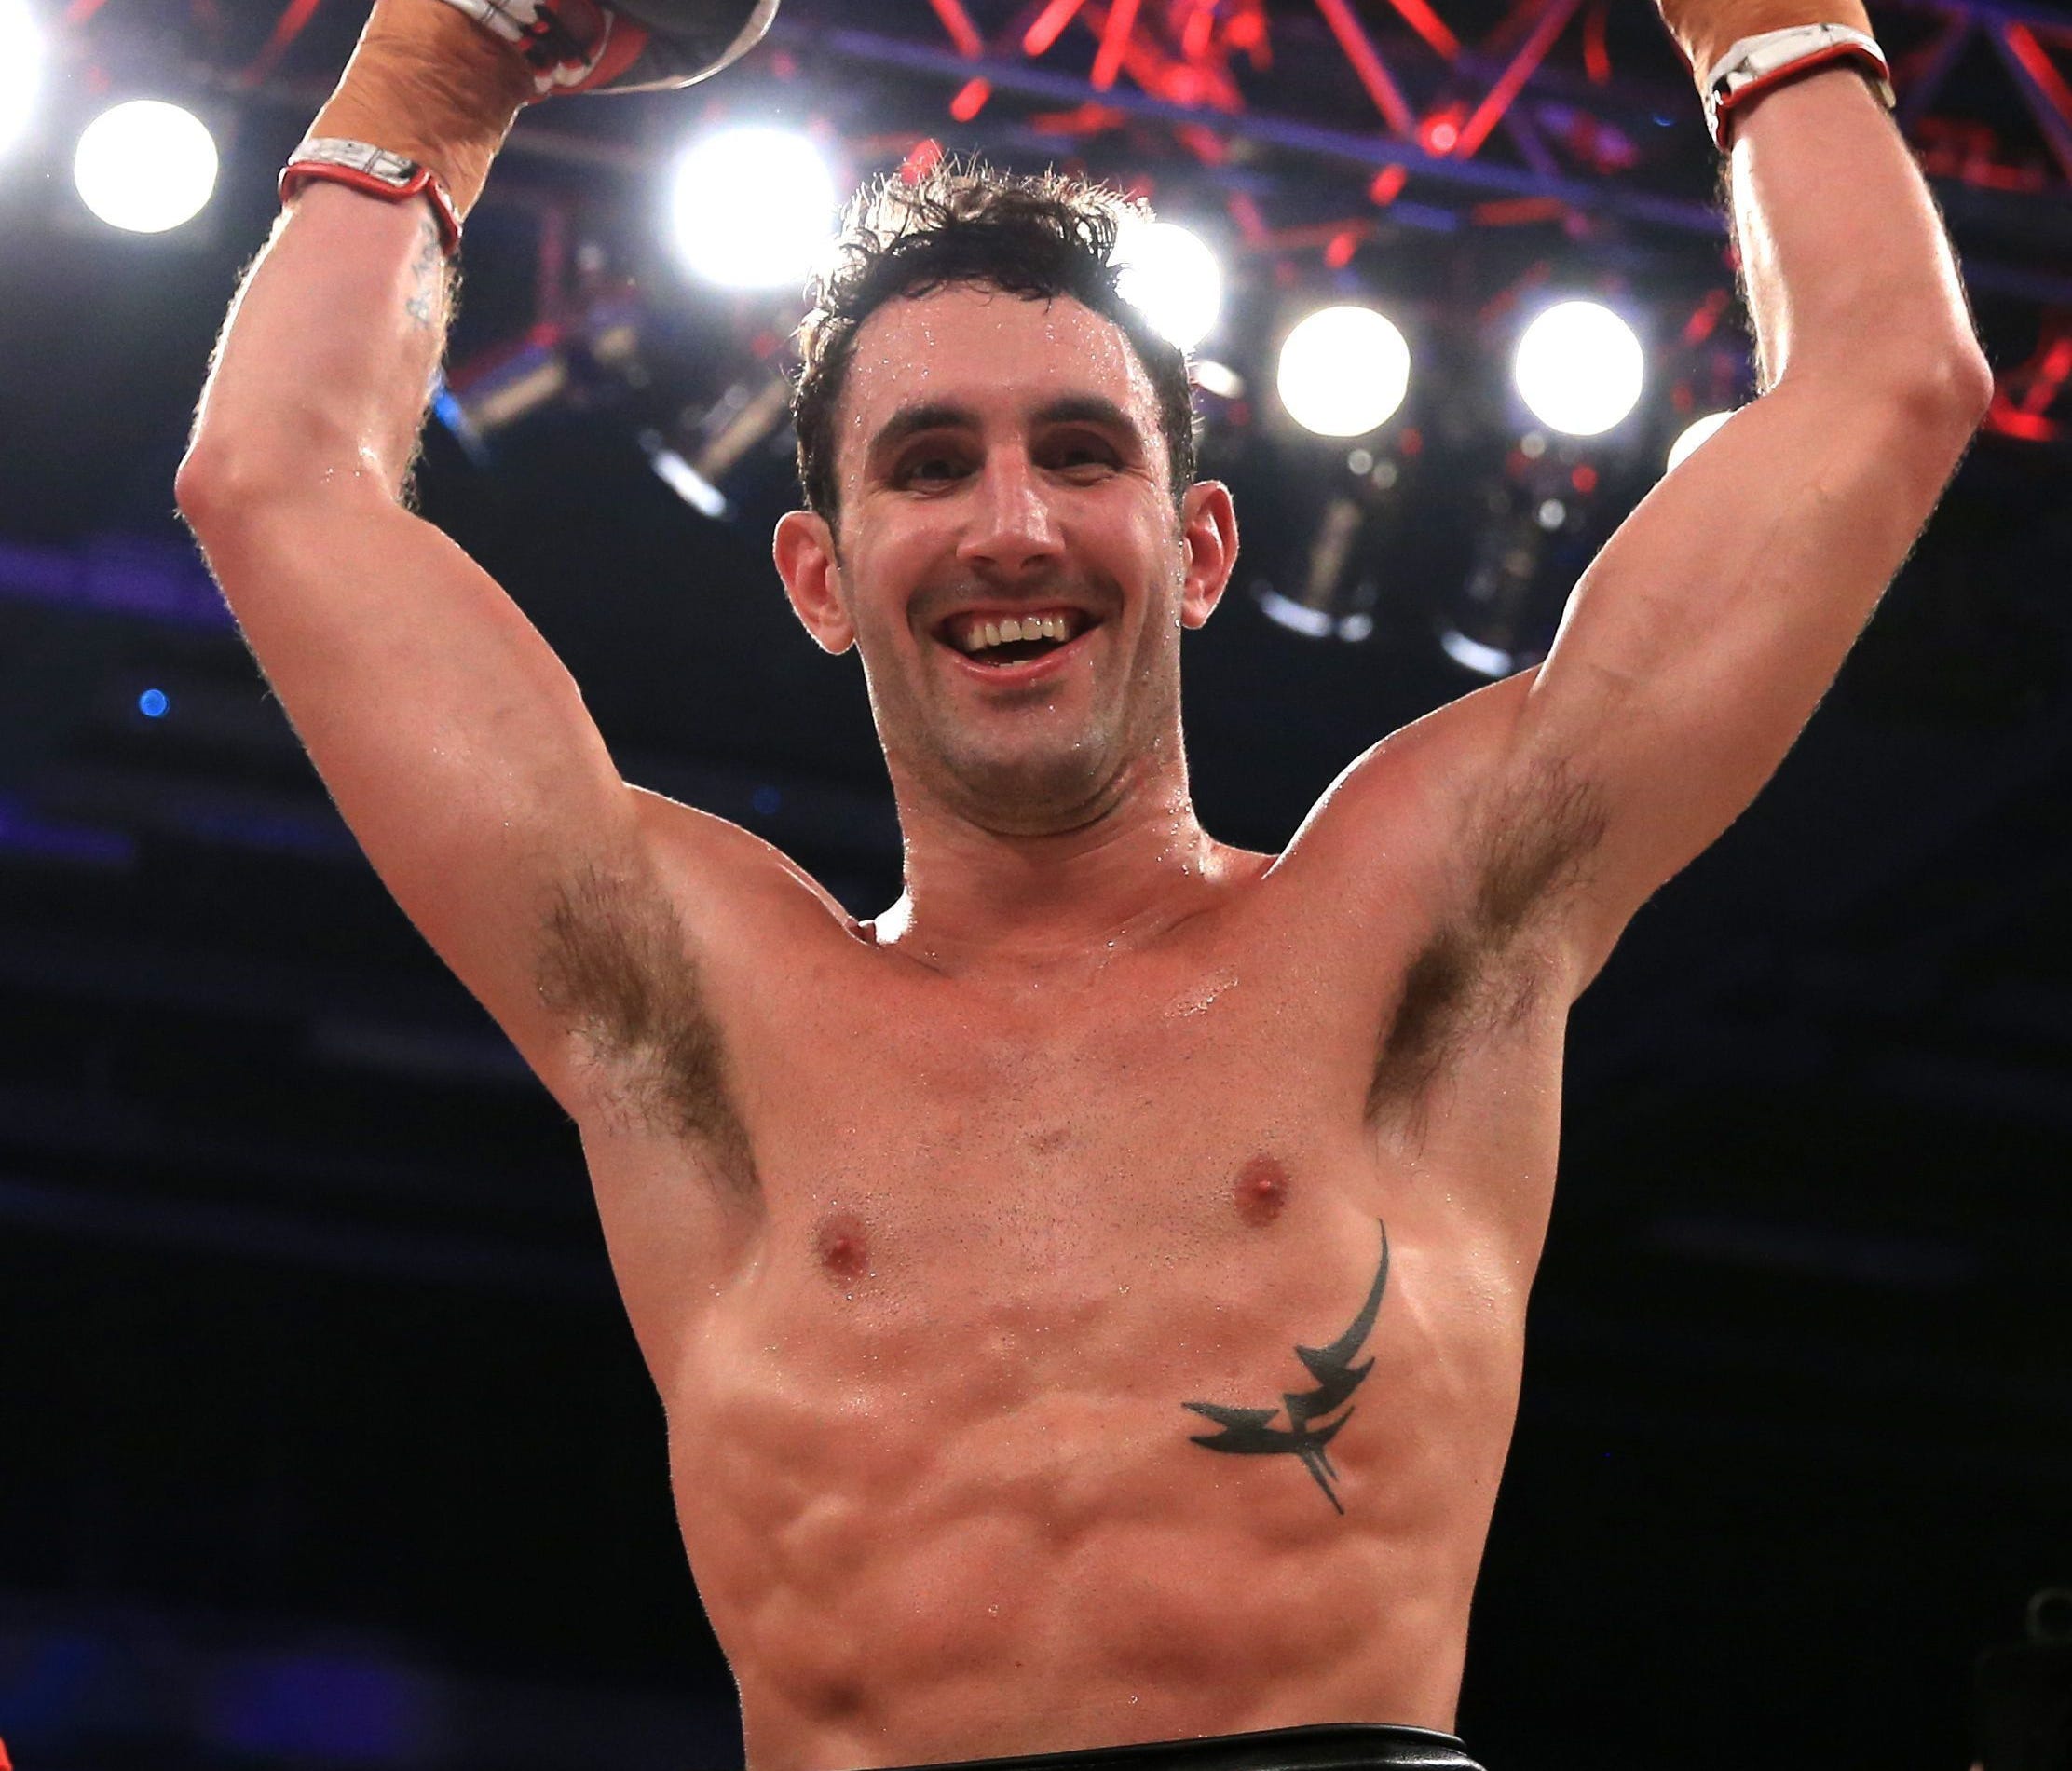 British boxer Scott Westgarth passed away shortly after winning a bout on Saturday